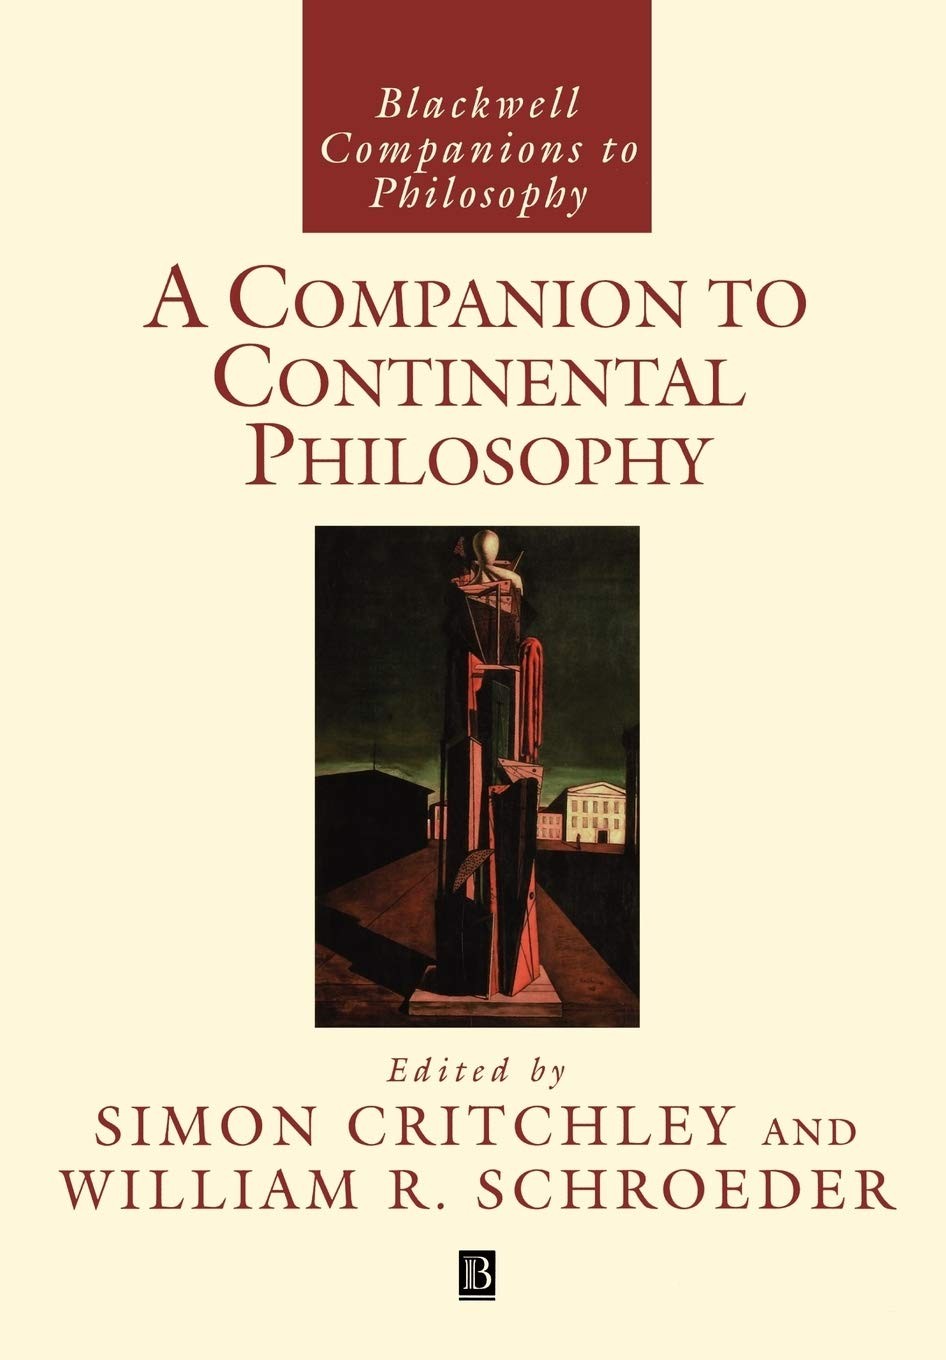 A Companion to Continental Philosophy